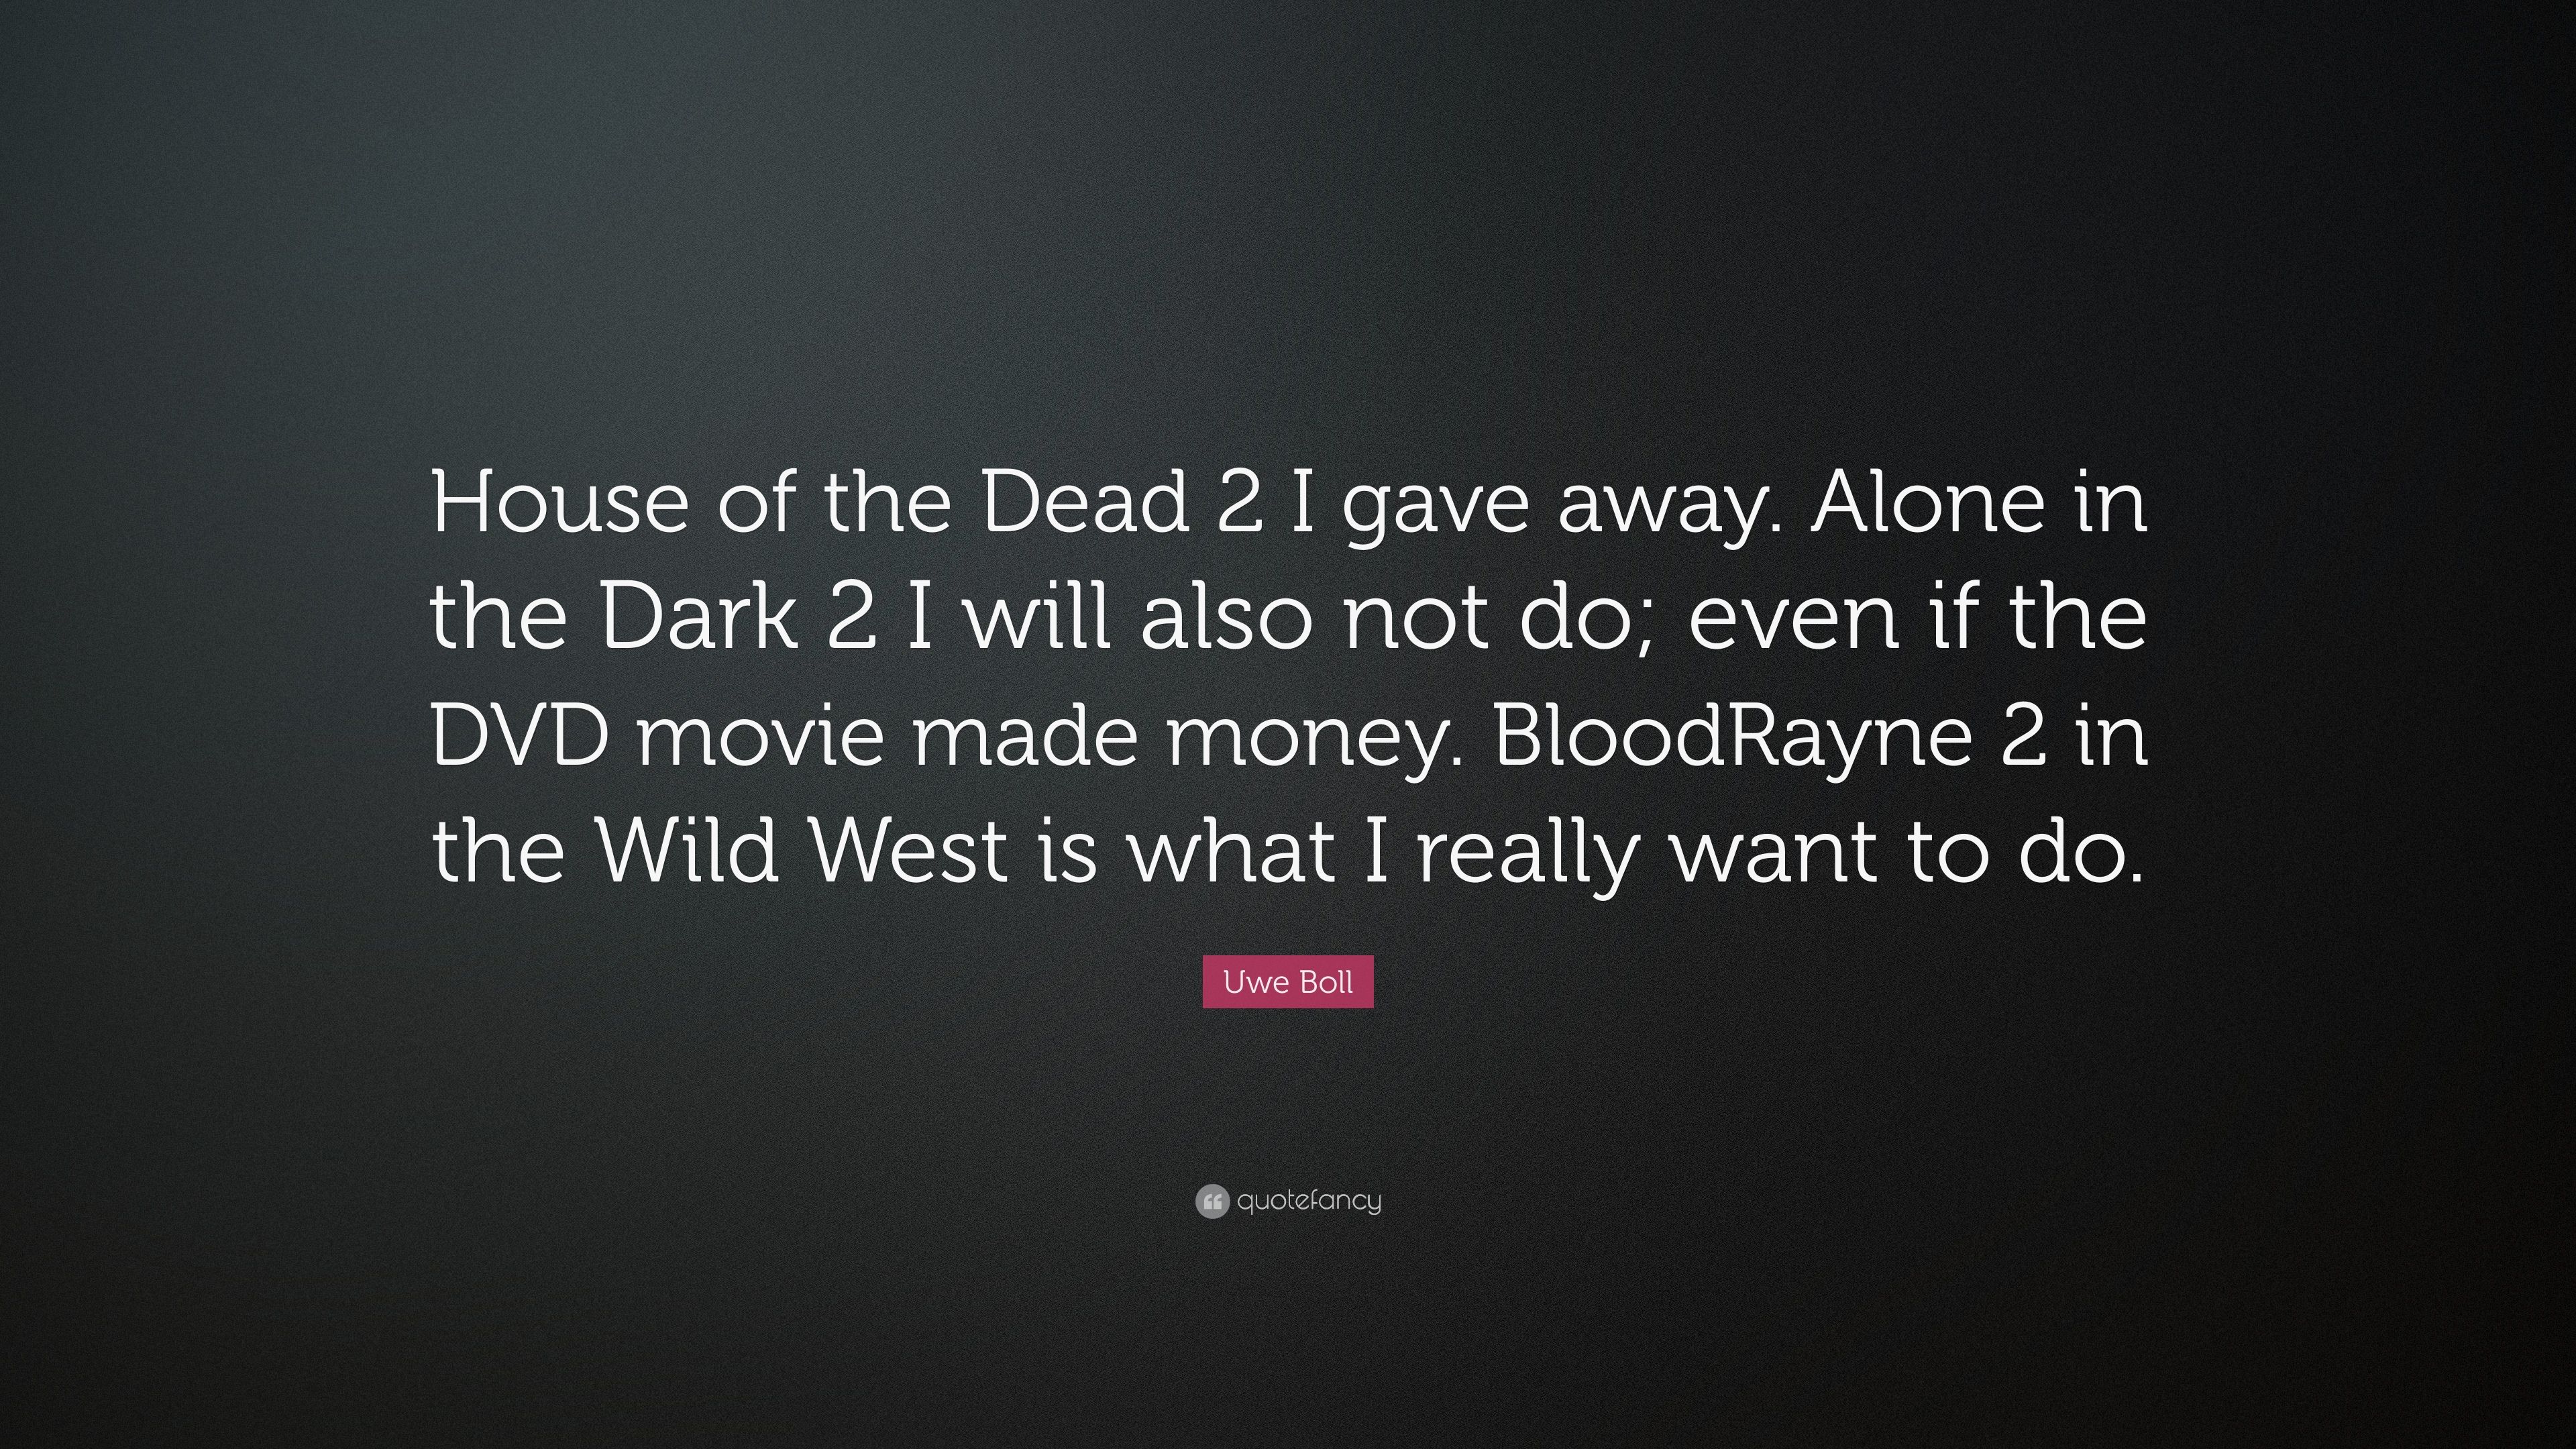 Uwe Boll Quote: “House of the Dead 2 I gave away. Alone in